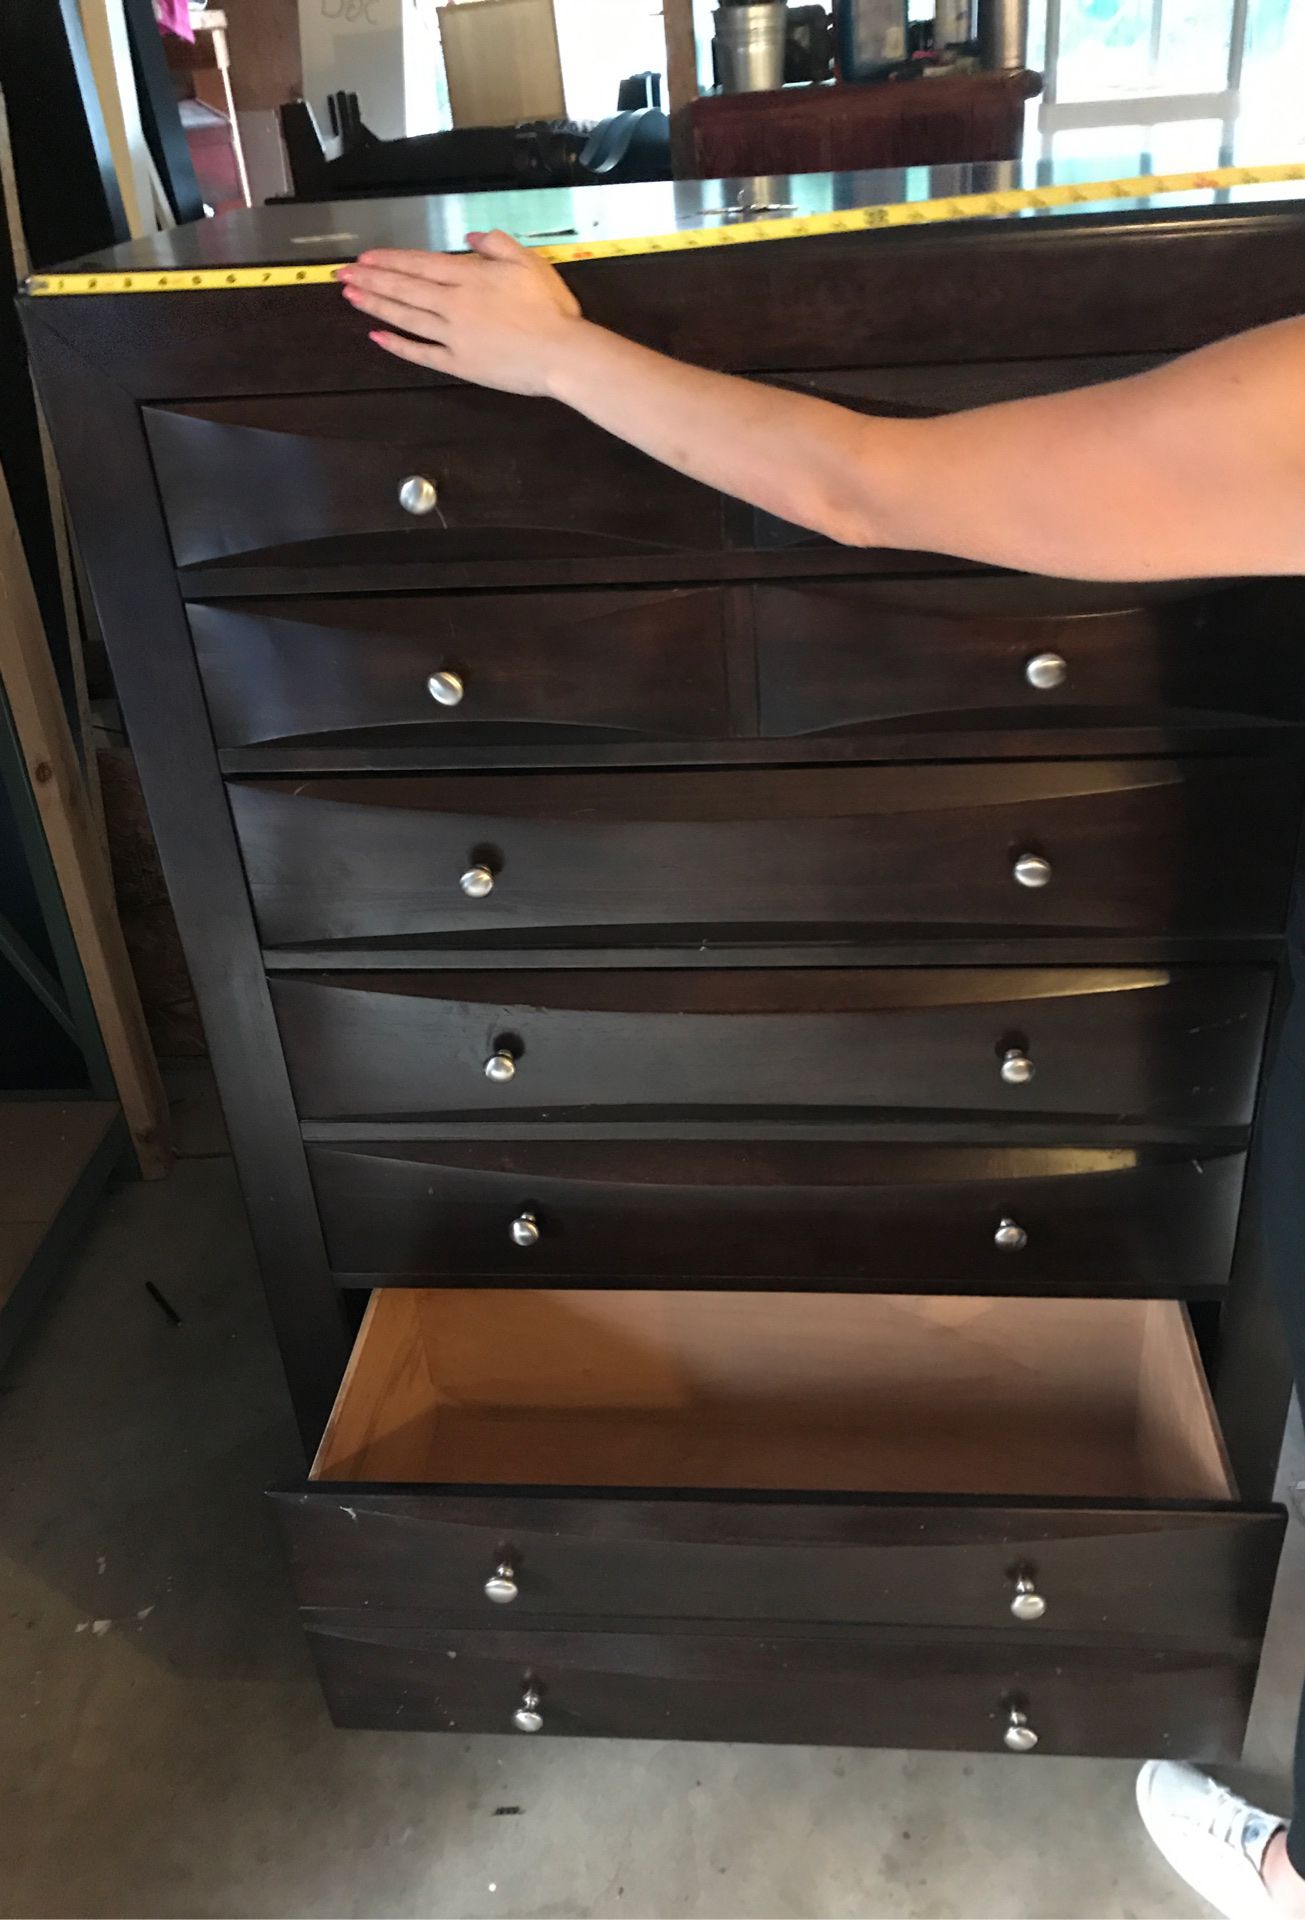 Used dresser 7 drawers. in good shape with a few scratches.